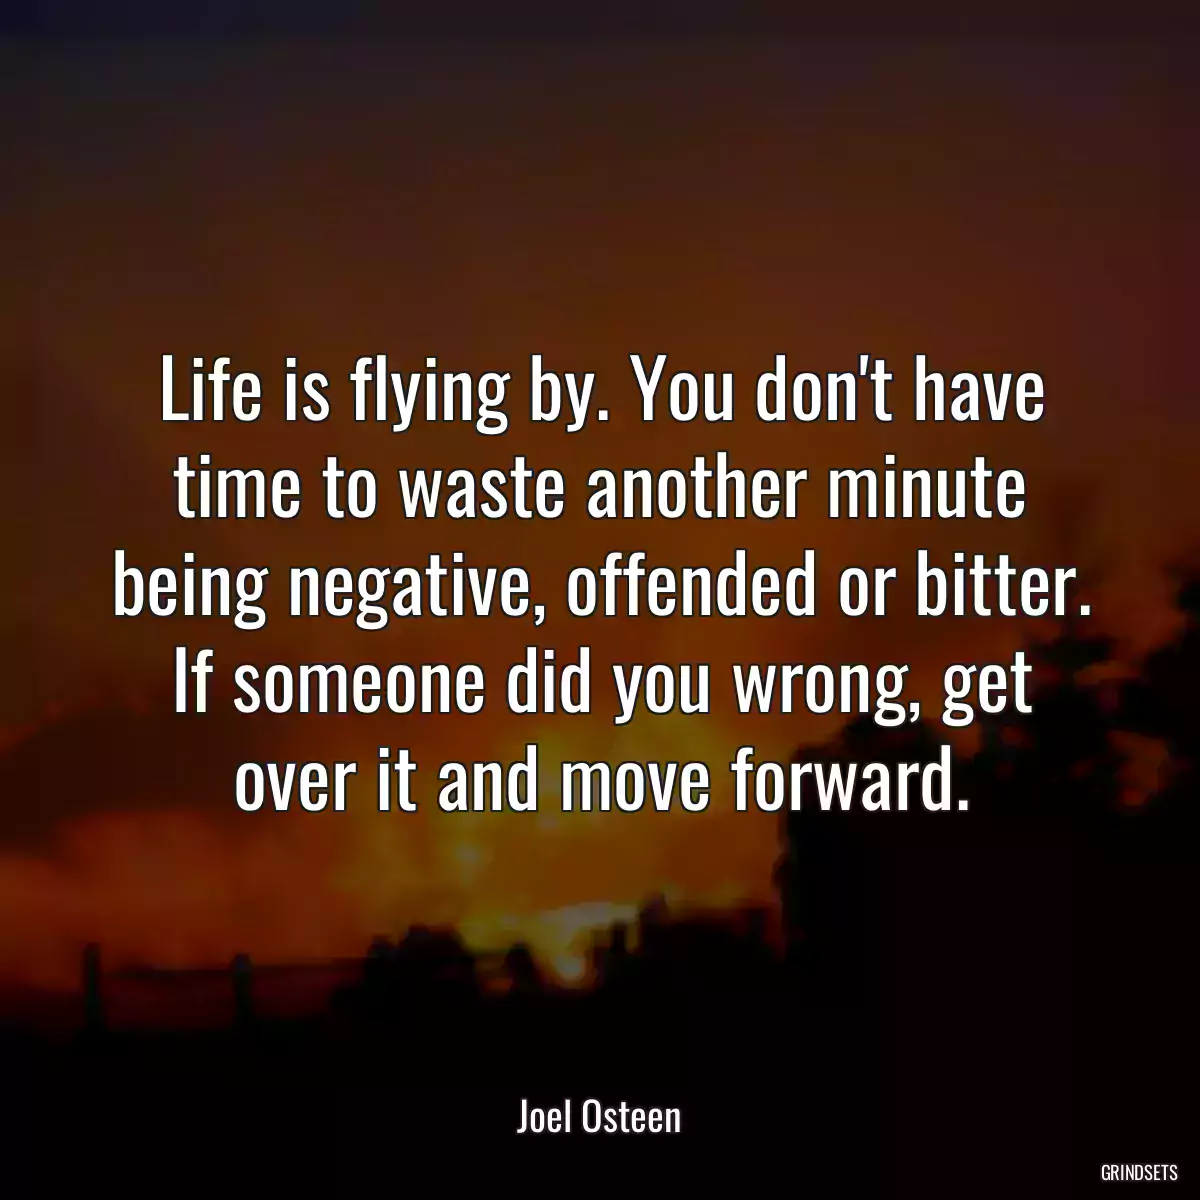 Life is flying by. You don\'t have time to waste another minute being negative, offended or bitter. If someone did you wrong, get over it and move forward.